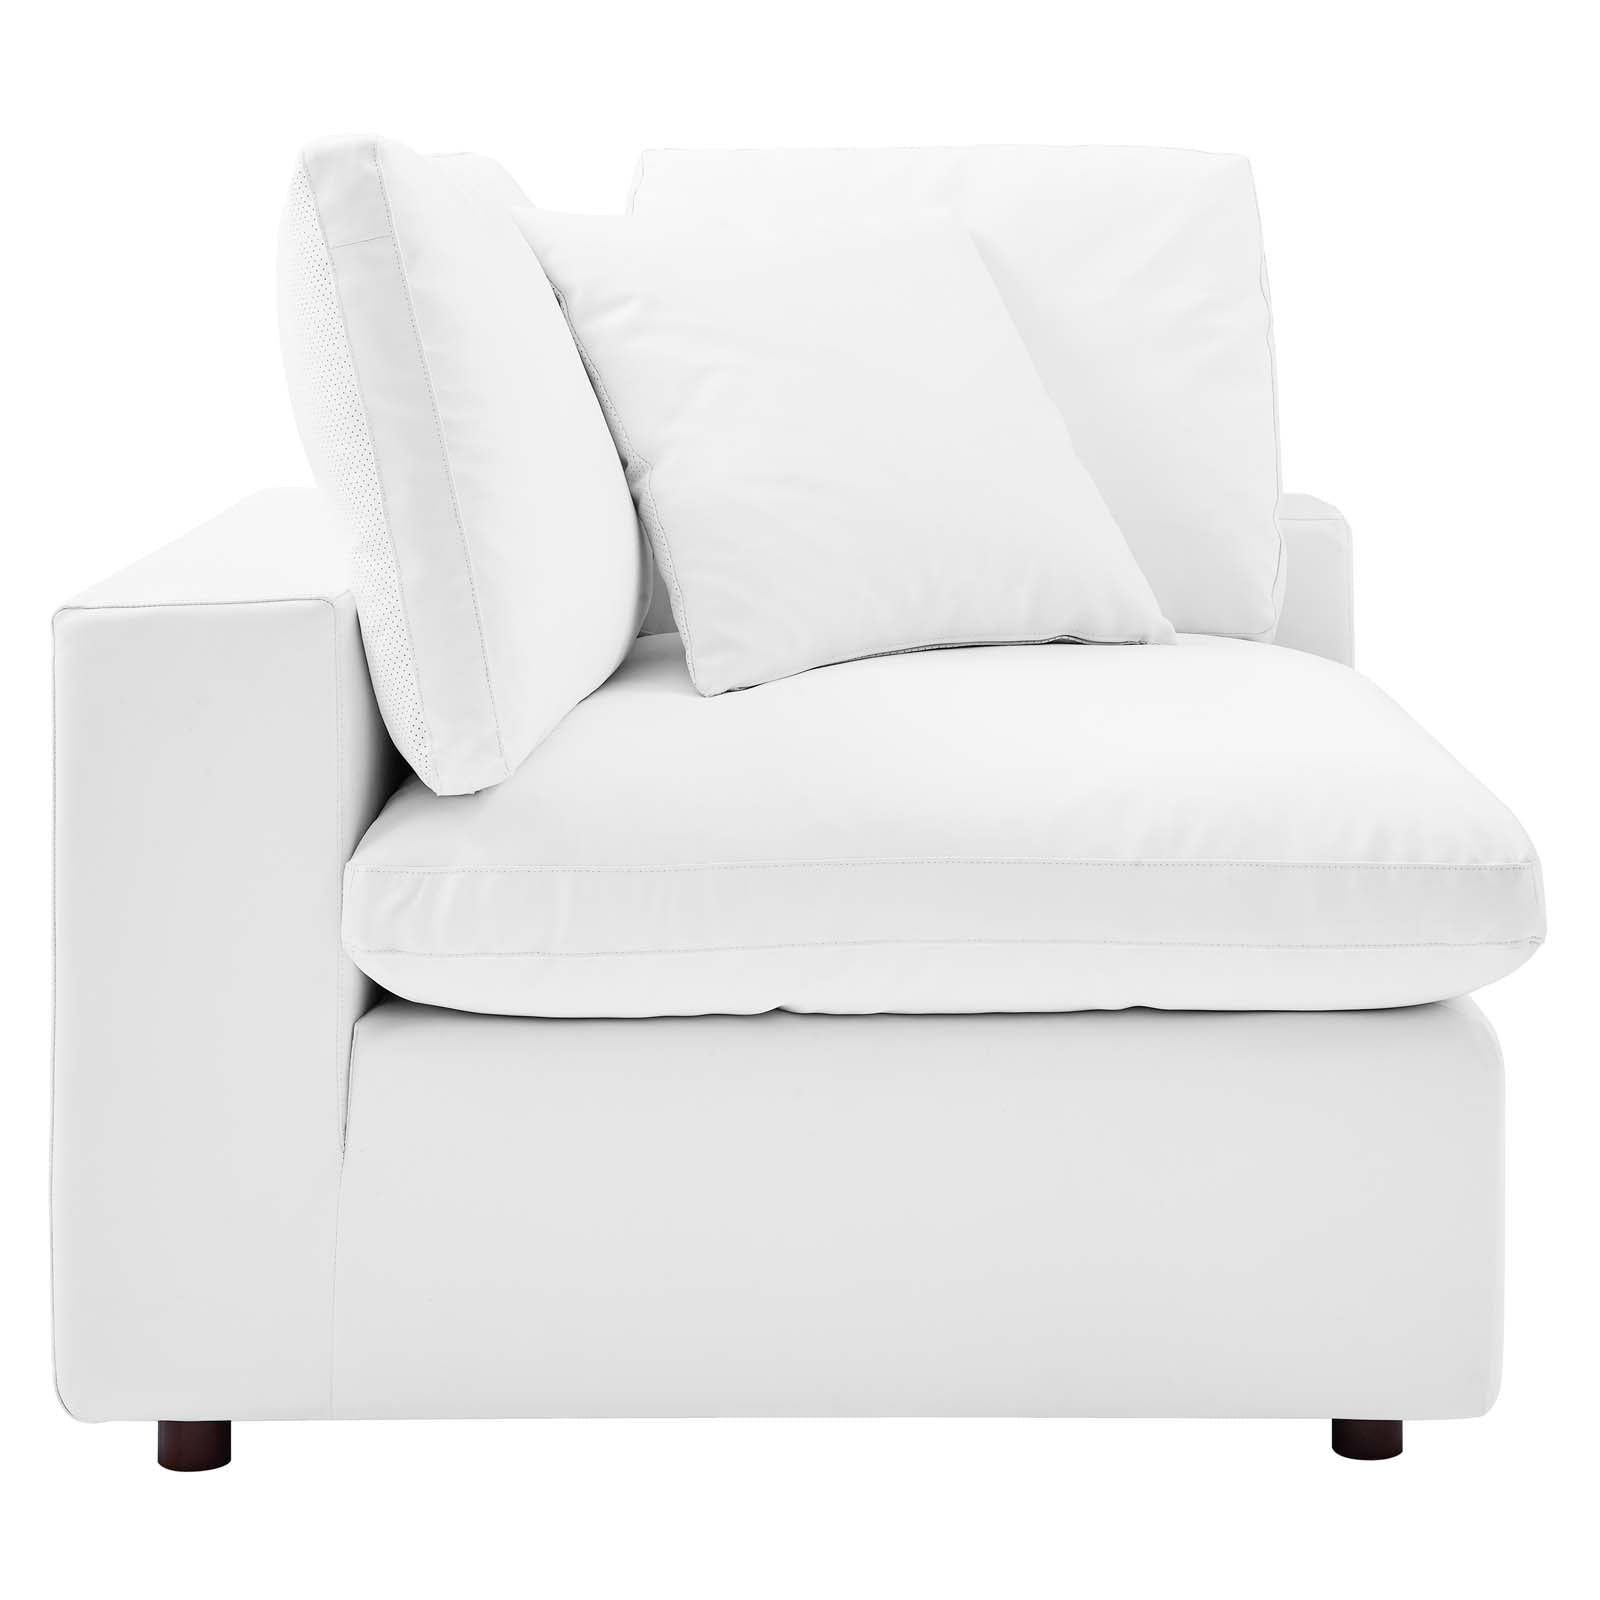 Modway Accent Chairs - Commix Down Filled Overstuffed Vegan Leather Corner Chair White